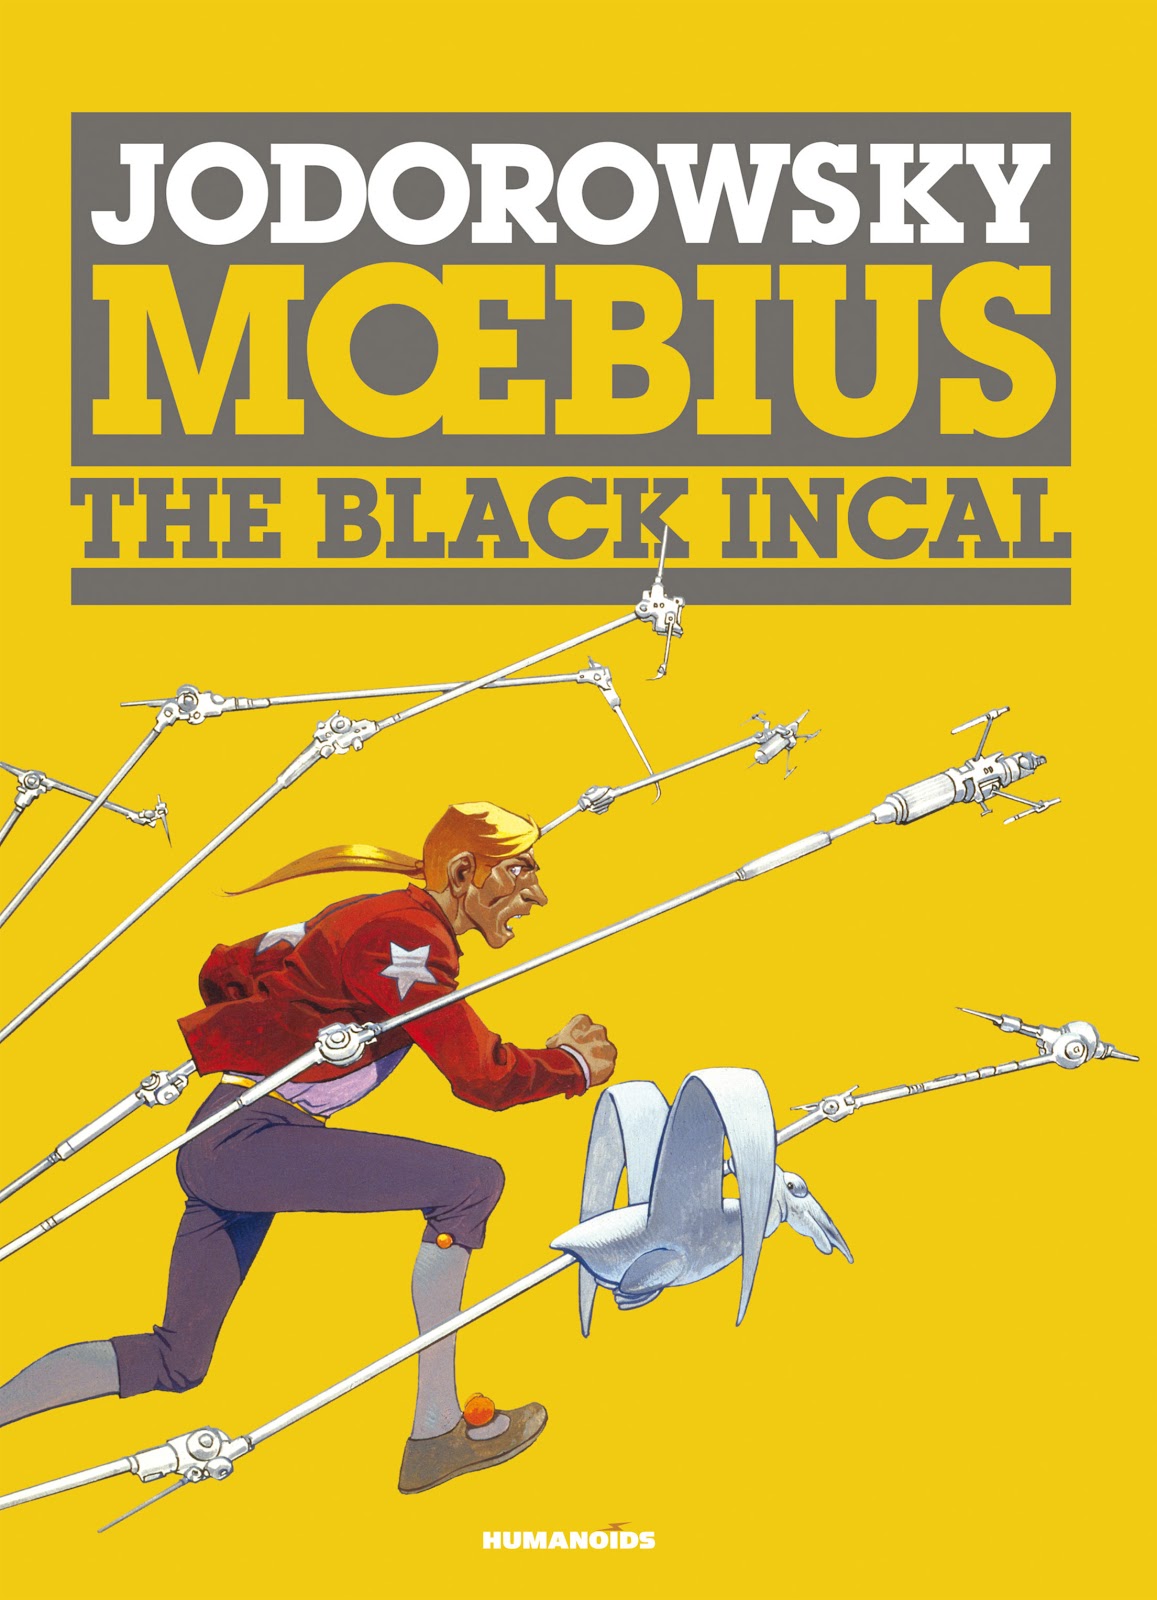 The Incal Tpb 1 | Read The Incal Tpb 1 comic online in high quality. Read  Full Comic online for free - Read comics online in high quality  .|viewcomiconline.com